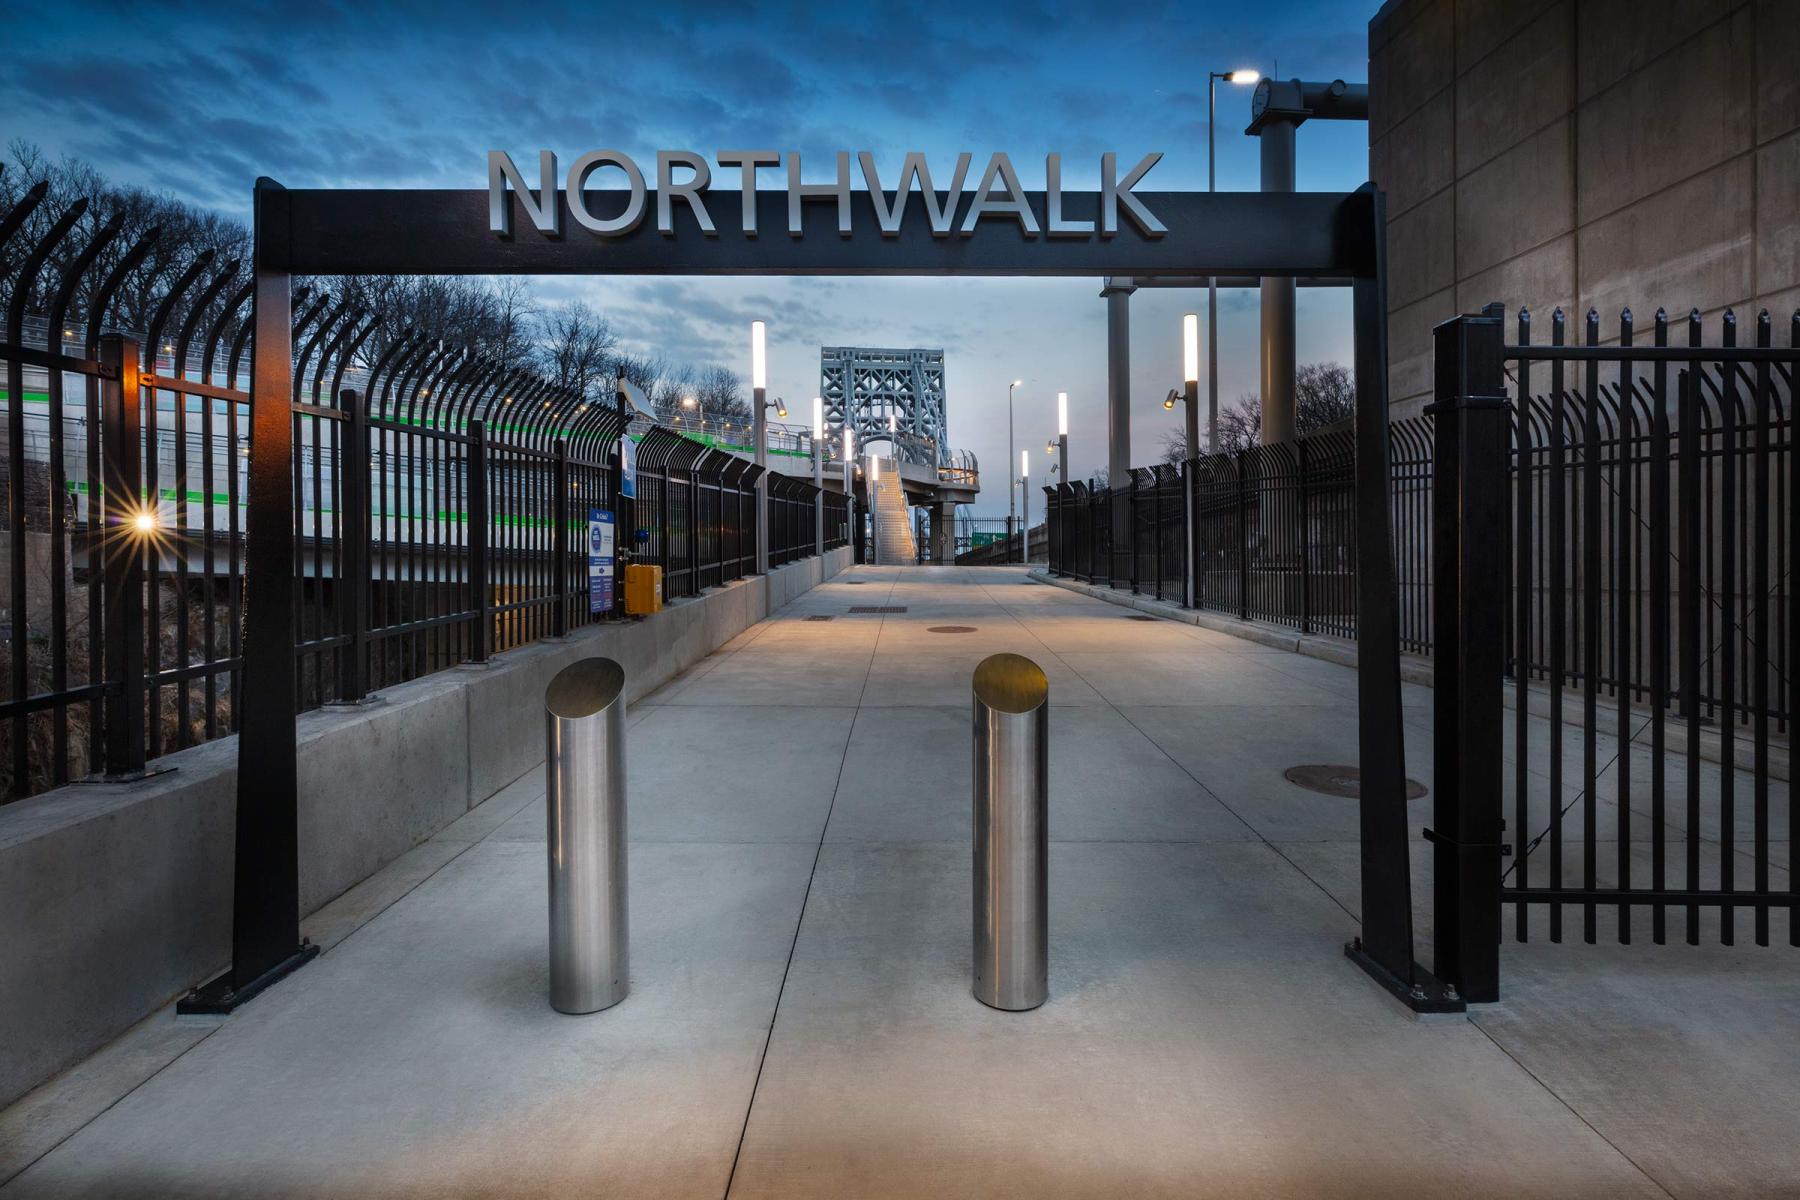 Fort Lee - New Jersey- Port Authority of NYNJ project featuring the renovated Northwalk for pedestrians and bicyclists.  The Northwalk runs from Fort Lee-NJ to NYC at 180th street. : Port Authority NYNJ : New York NY Architectural Photographer | Interior and Exterior